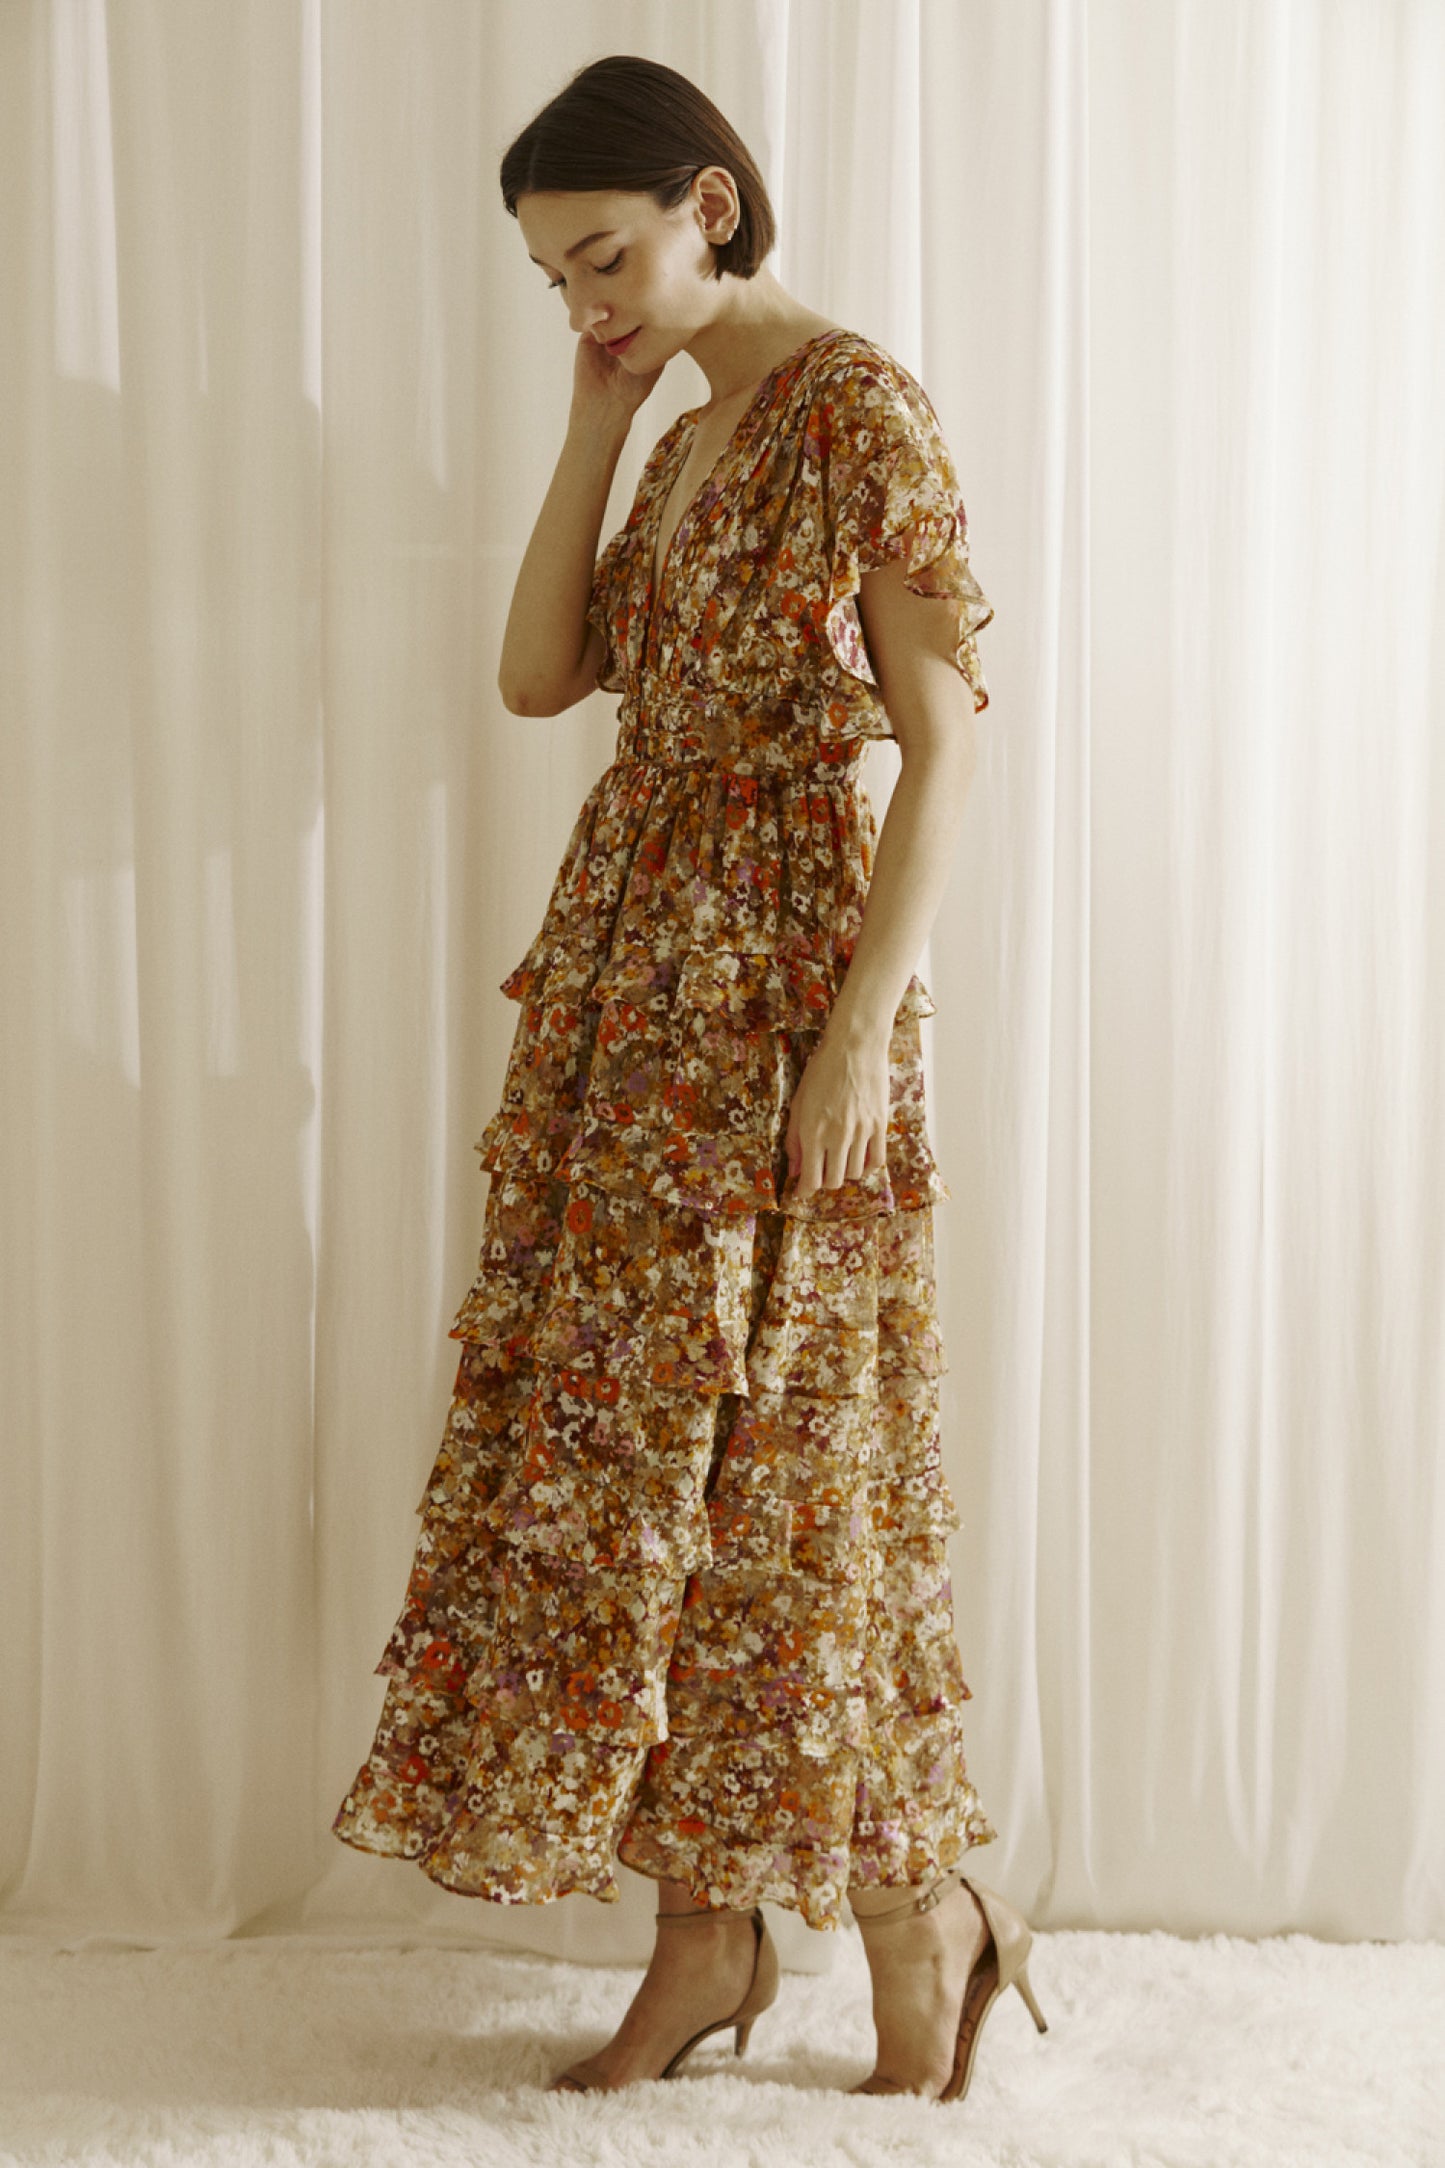 Ditsy floral print midi dress multicolor. Prominent browns, oranges, purples, and maroons.  It shows a deep v-neckline, short fluttered, ruffled sleeves, and a cinched empire waist with center buttons. It also has a ruffled, tiered layered, midi bottom and an open back with a crisscross back tie..  Sidel view.